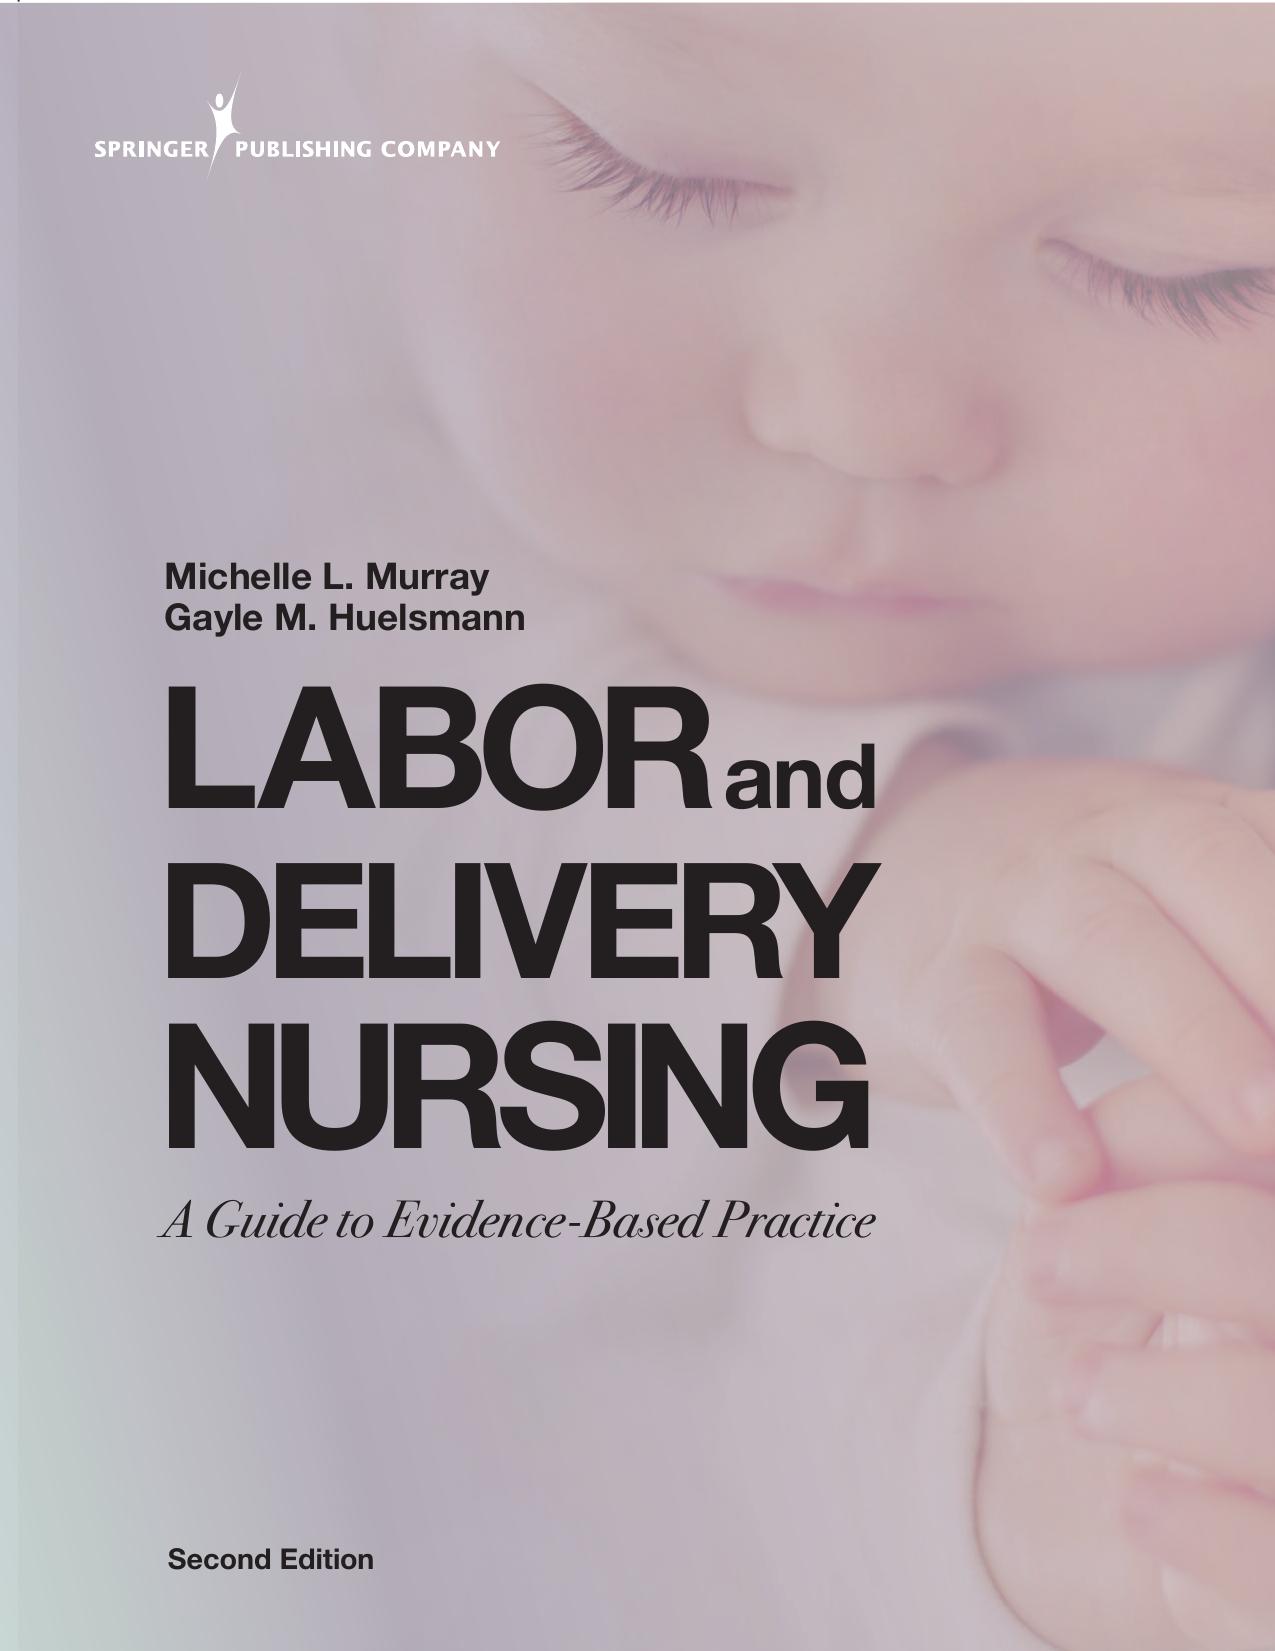 Labor and Delivery Nursing: A Guide to Evidence-Based Practice